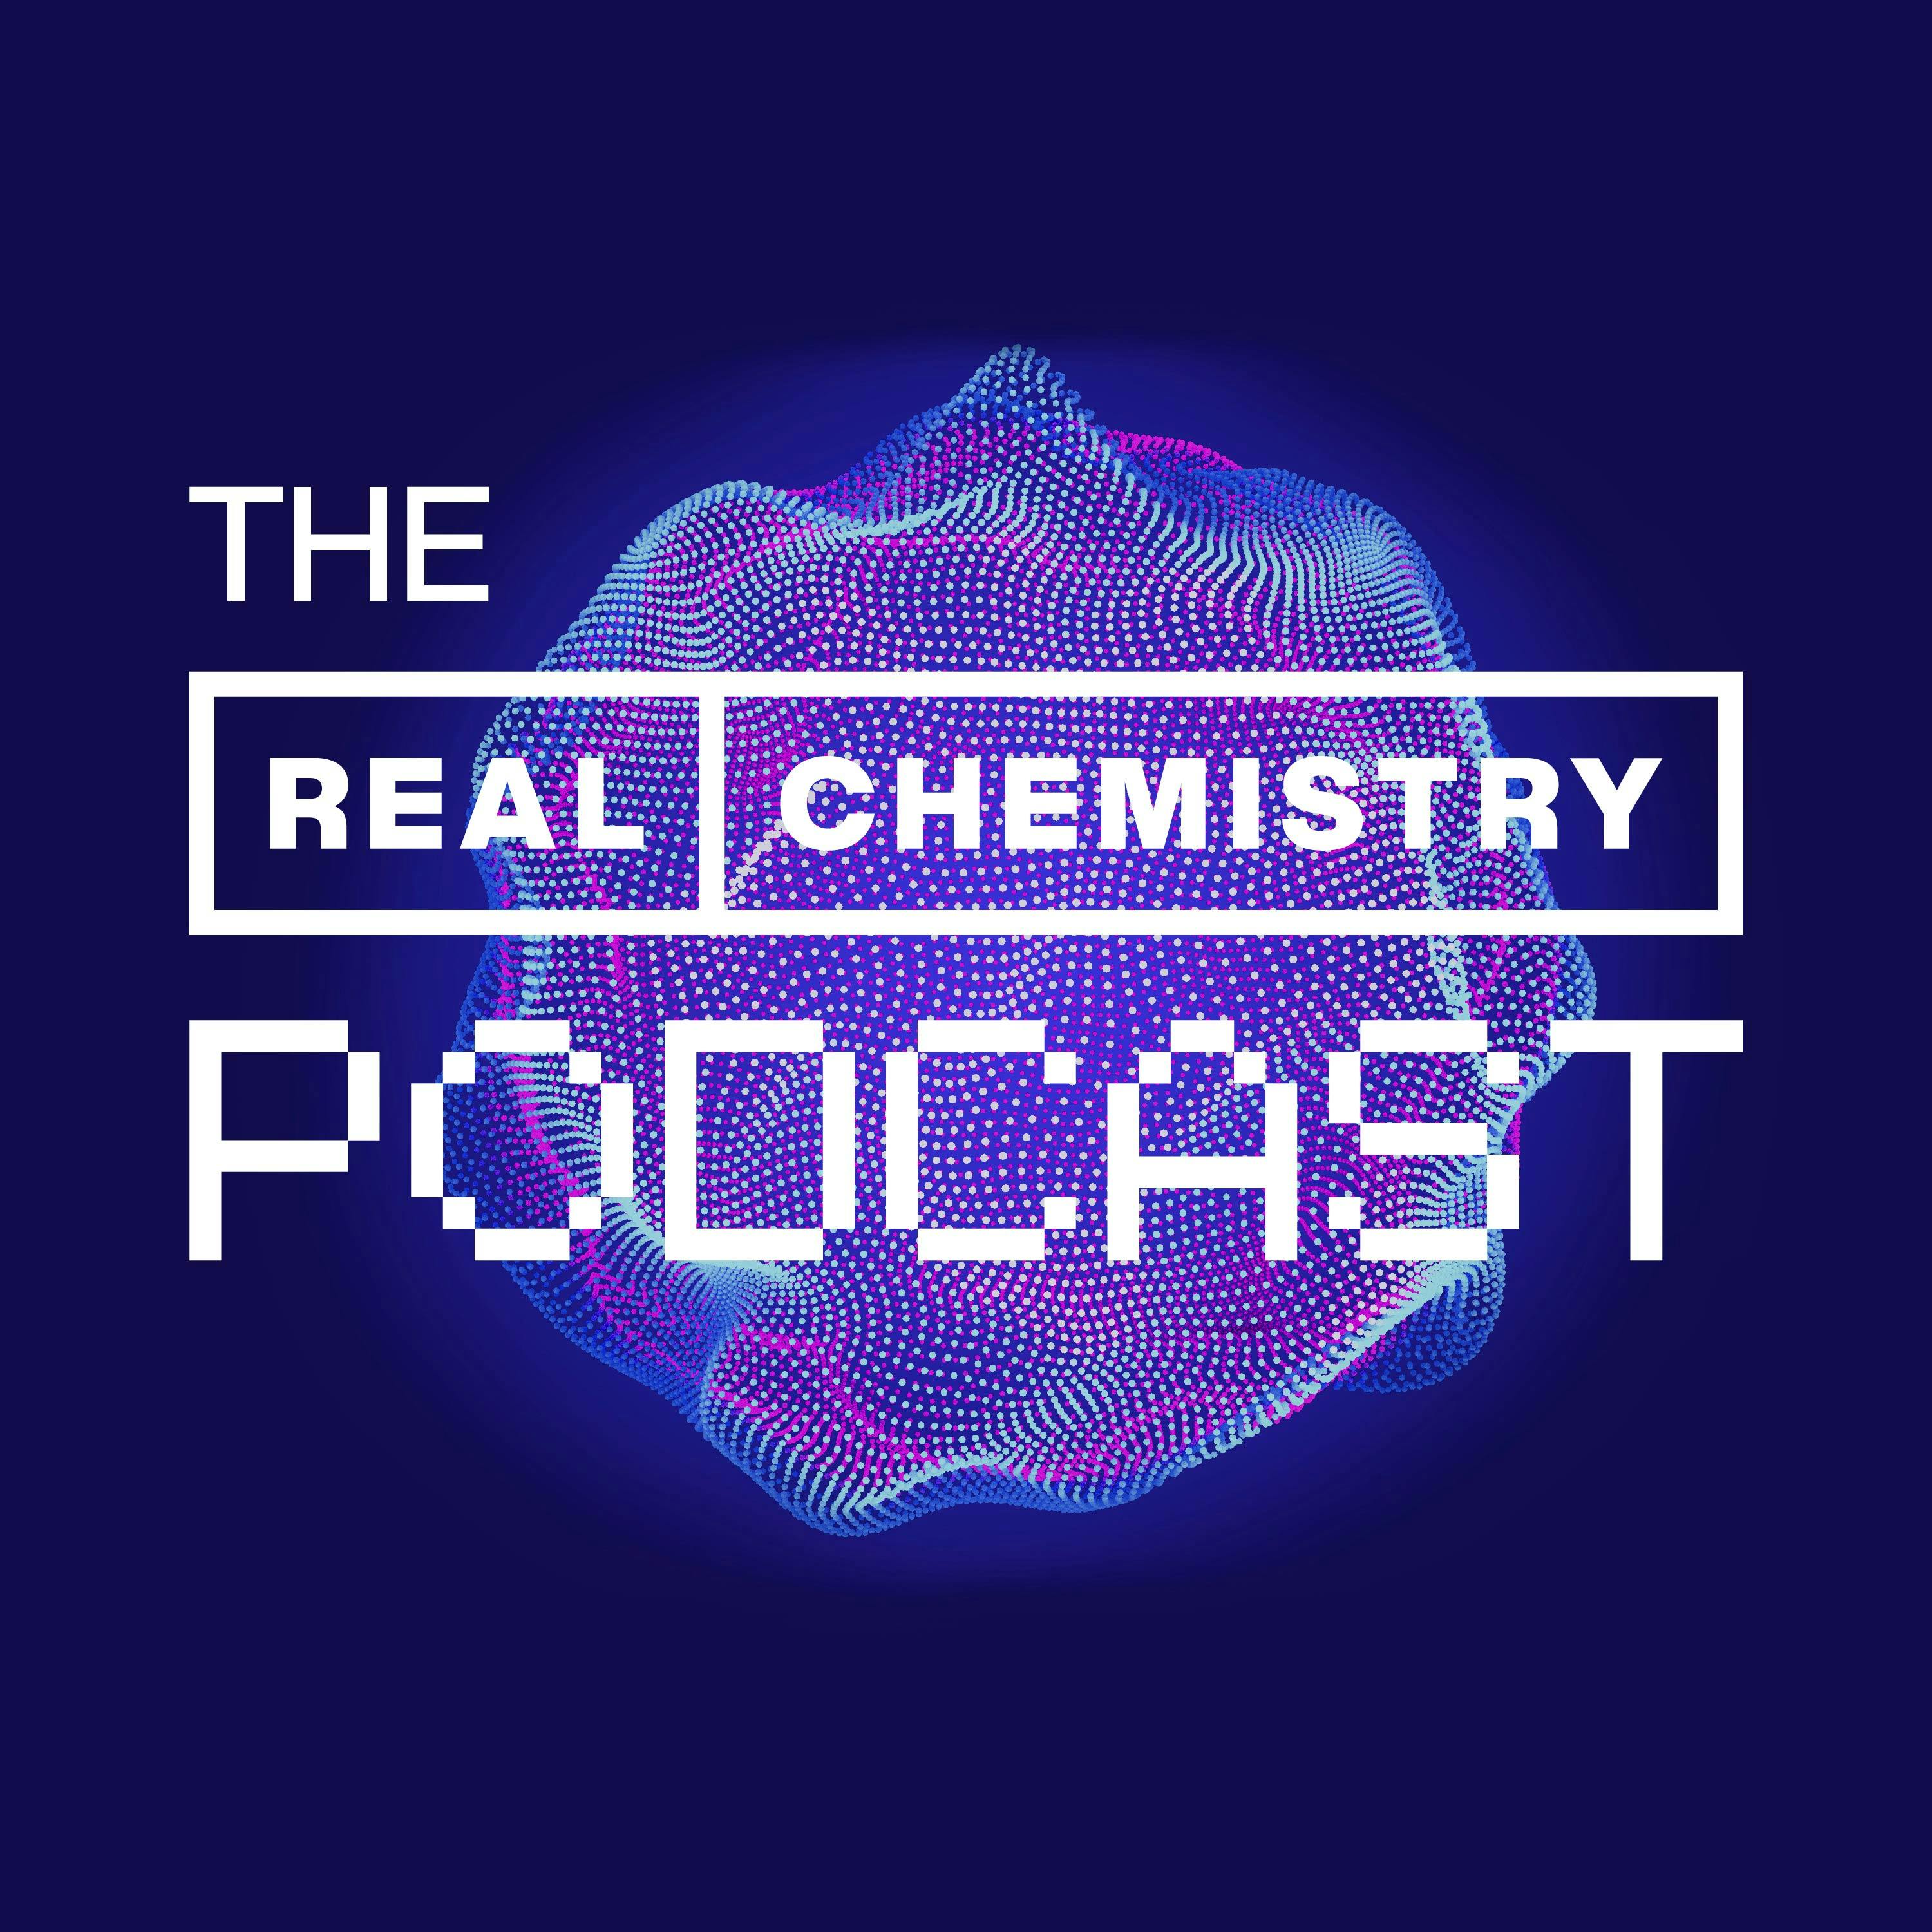 Coming Out as LGBTQIA+: Beth Weiss, Global Head of Facilities, Real Chemistry & Jim Weiss, Founder & CEO, Real Chemistry